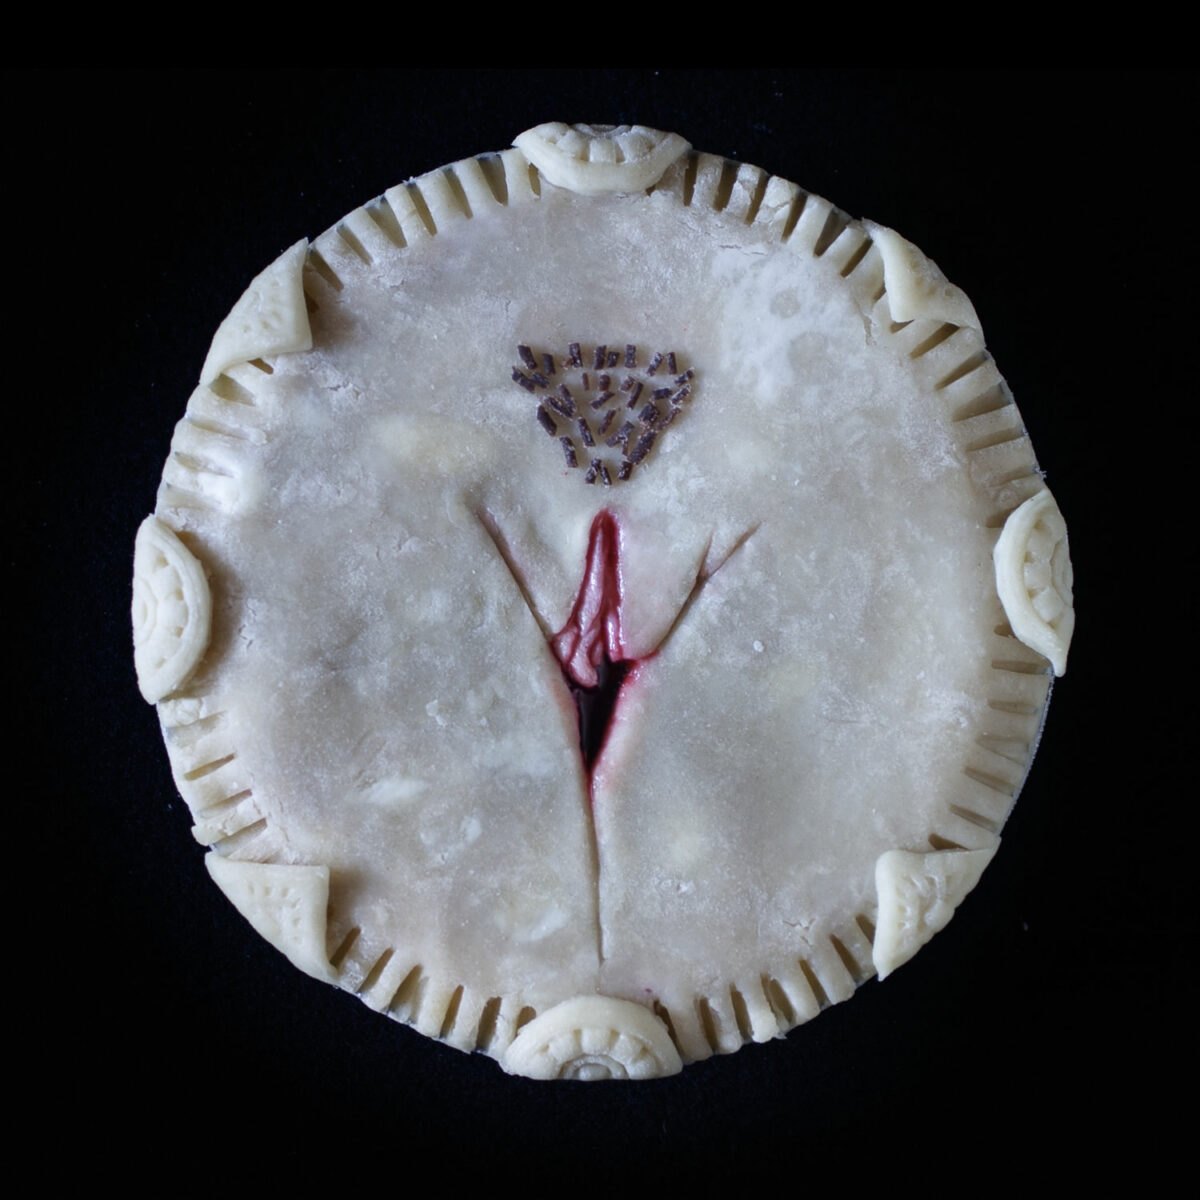 Unbaked art pie with cherry filling. The pie is sculpted to look like the frontal view of a vulva.